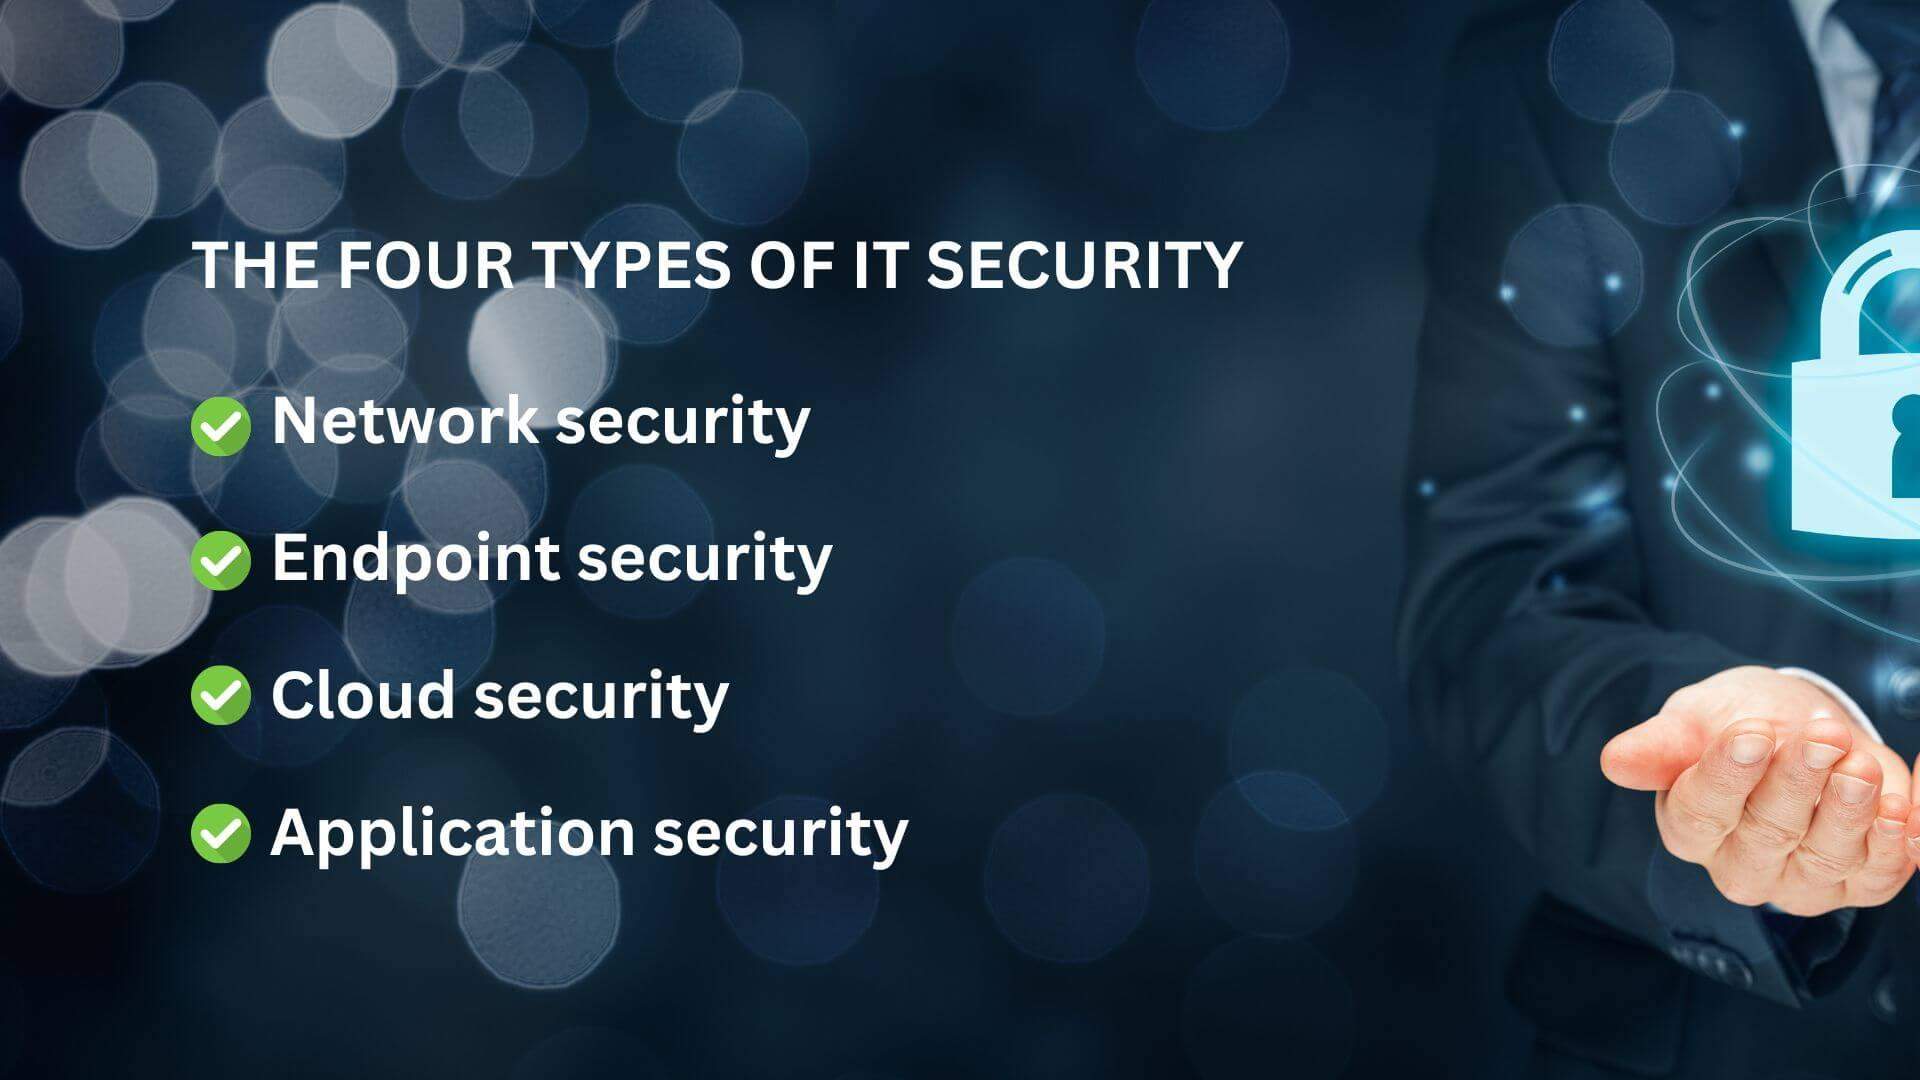 The Four Types of IT Security